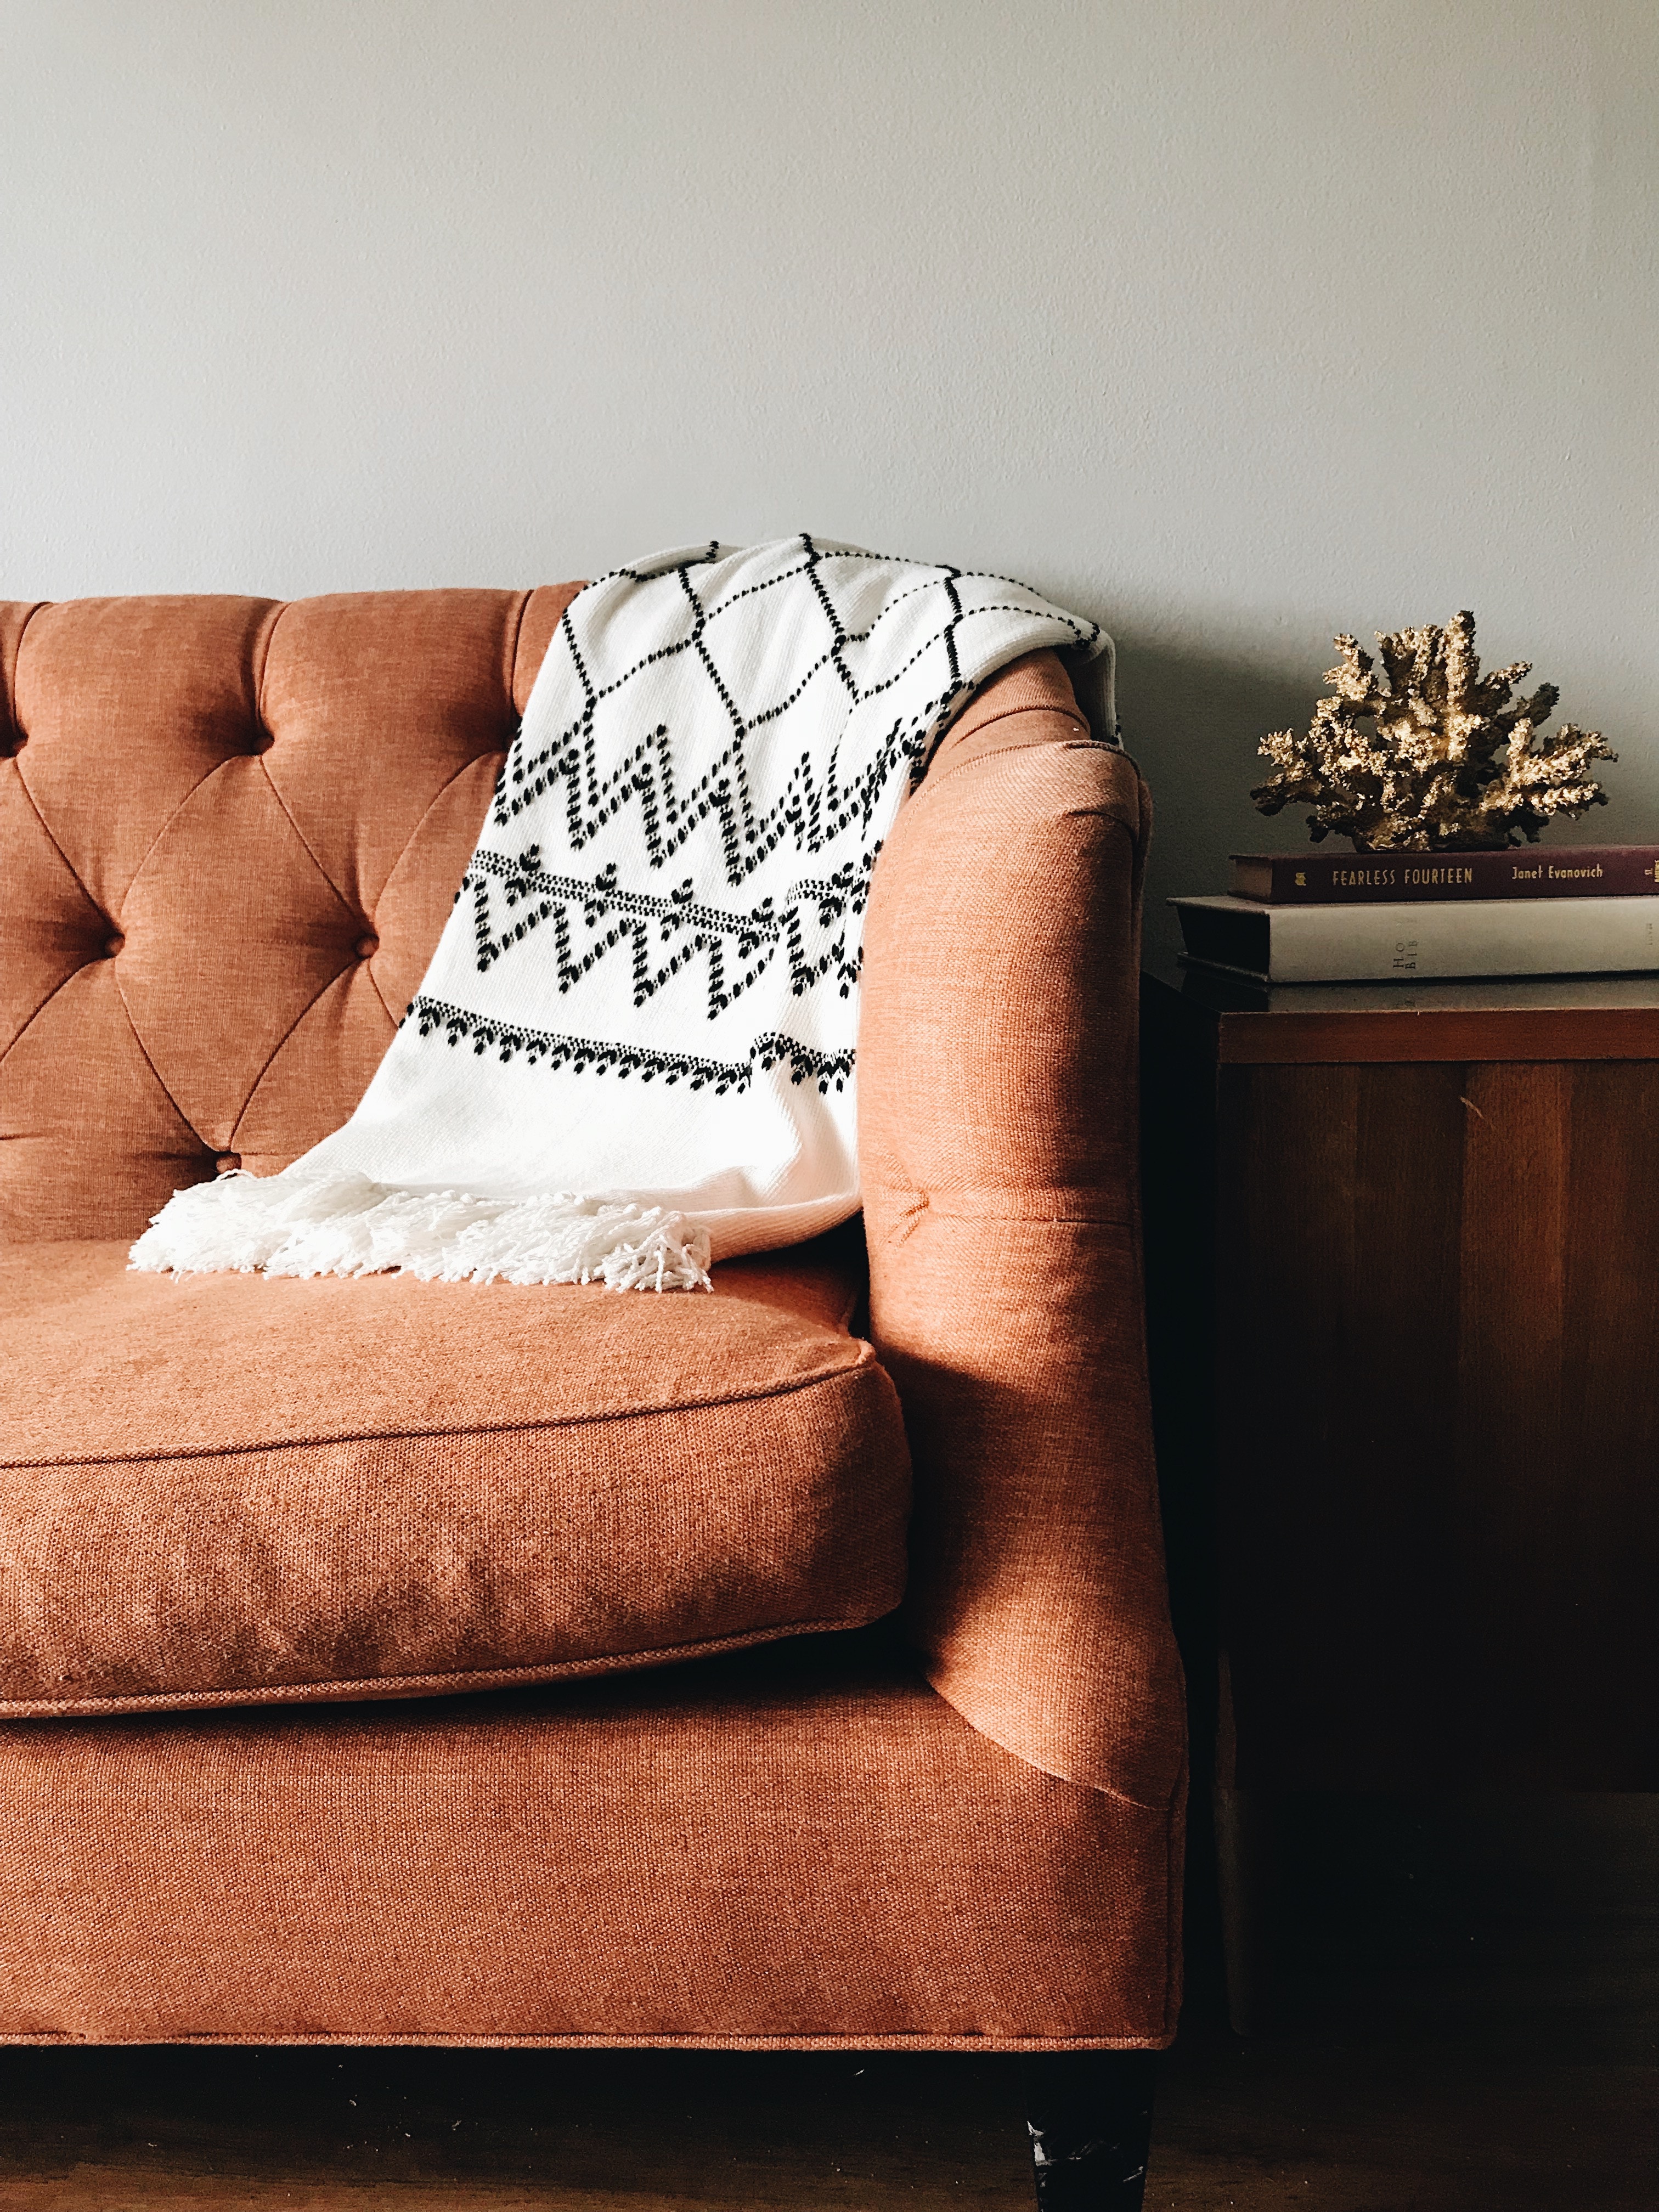 4 Quick and easy ways to make your house feel more like a home